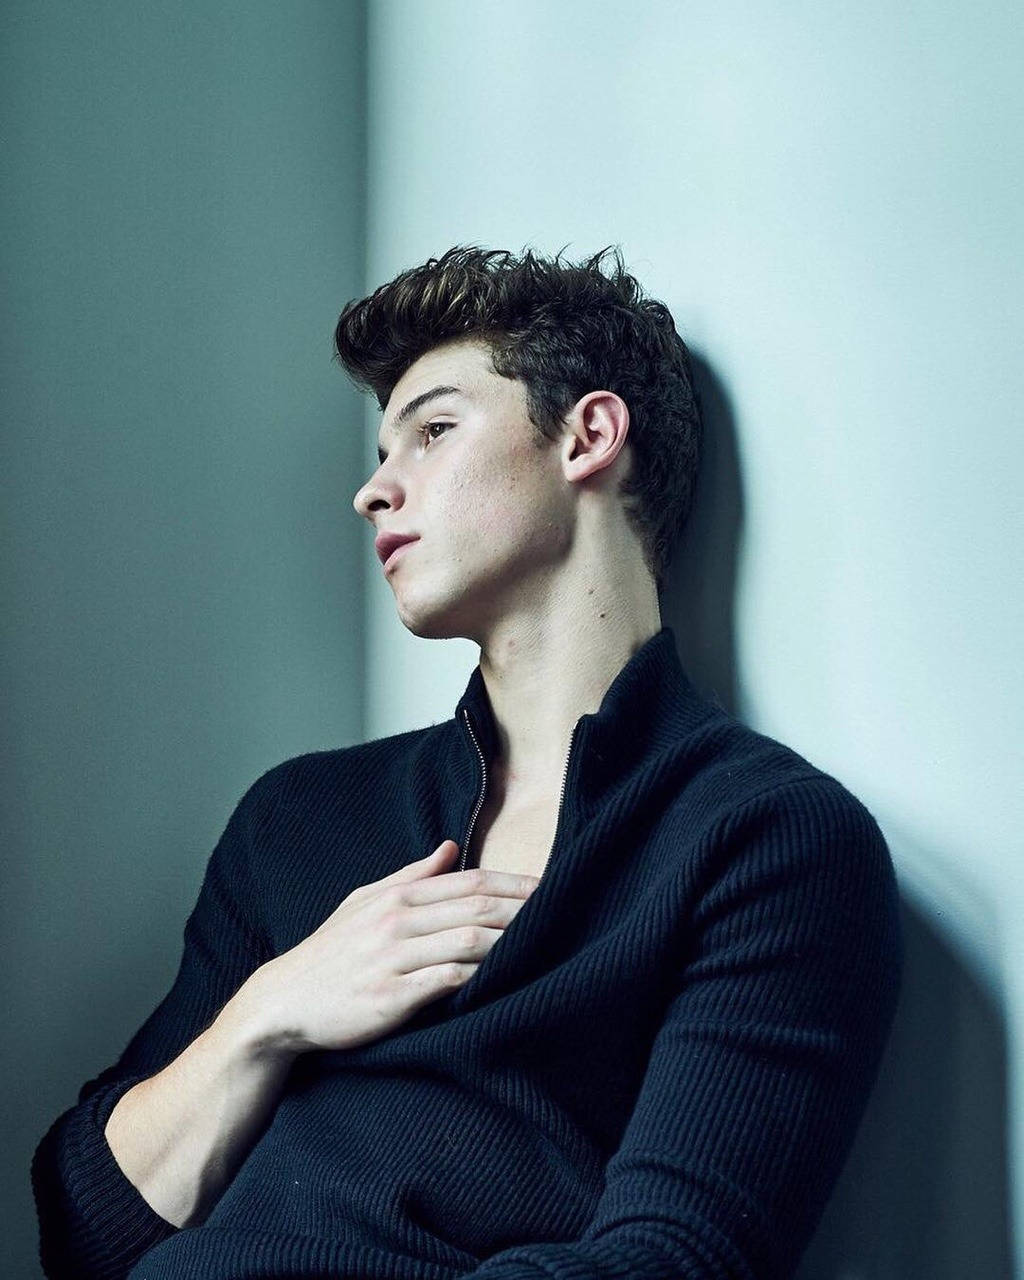 Shawn Mendes For L'uomo Vogue Wallpaper